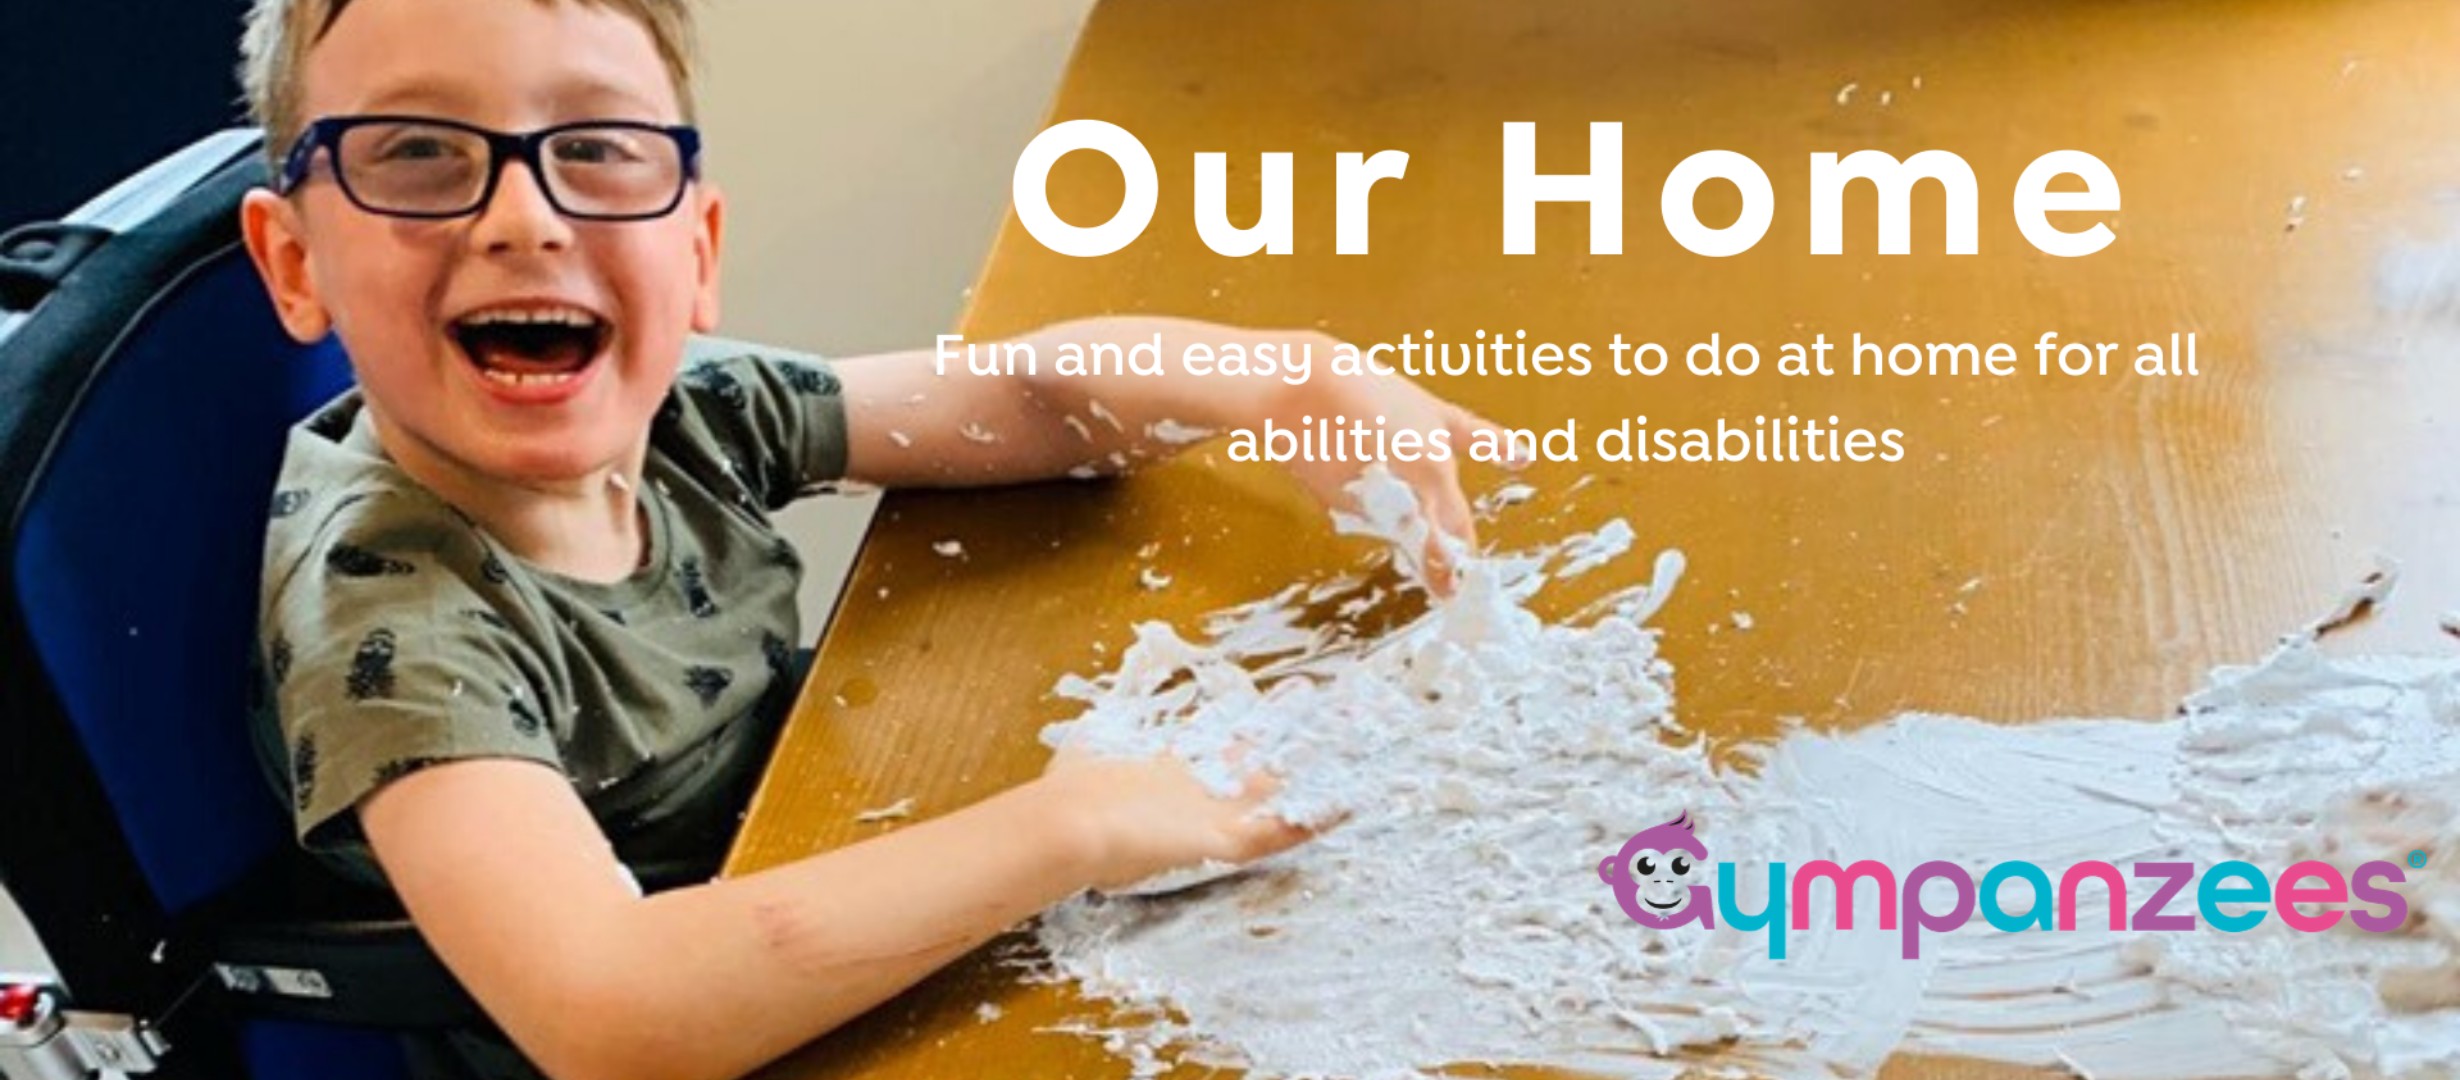 young boy in wheelchair looking very happy doing a craft, text reads 'our home, fun and easy activities to do at home for all abilities and disabilities'